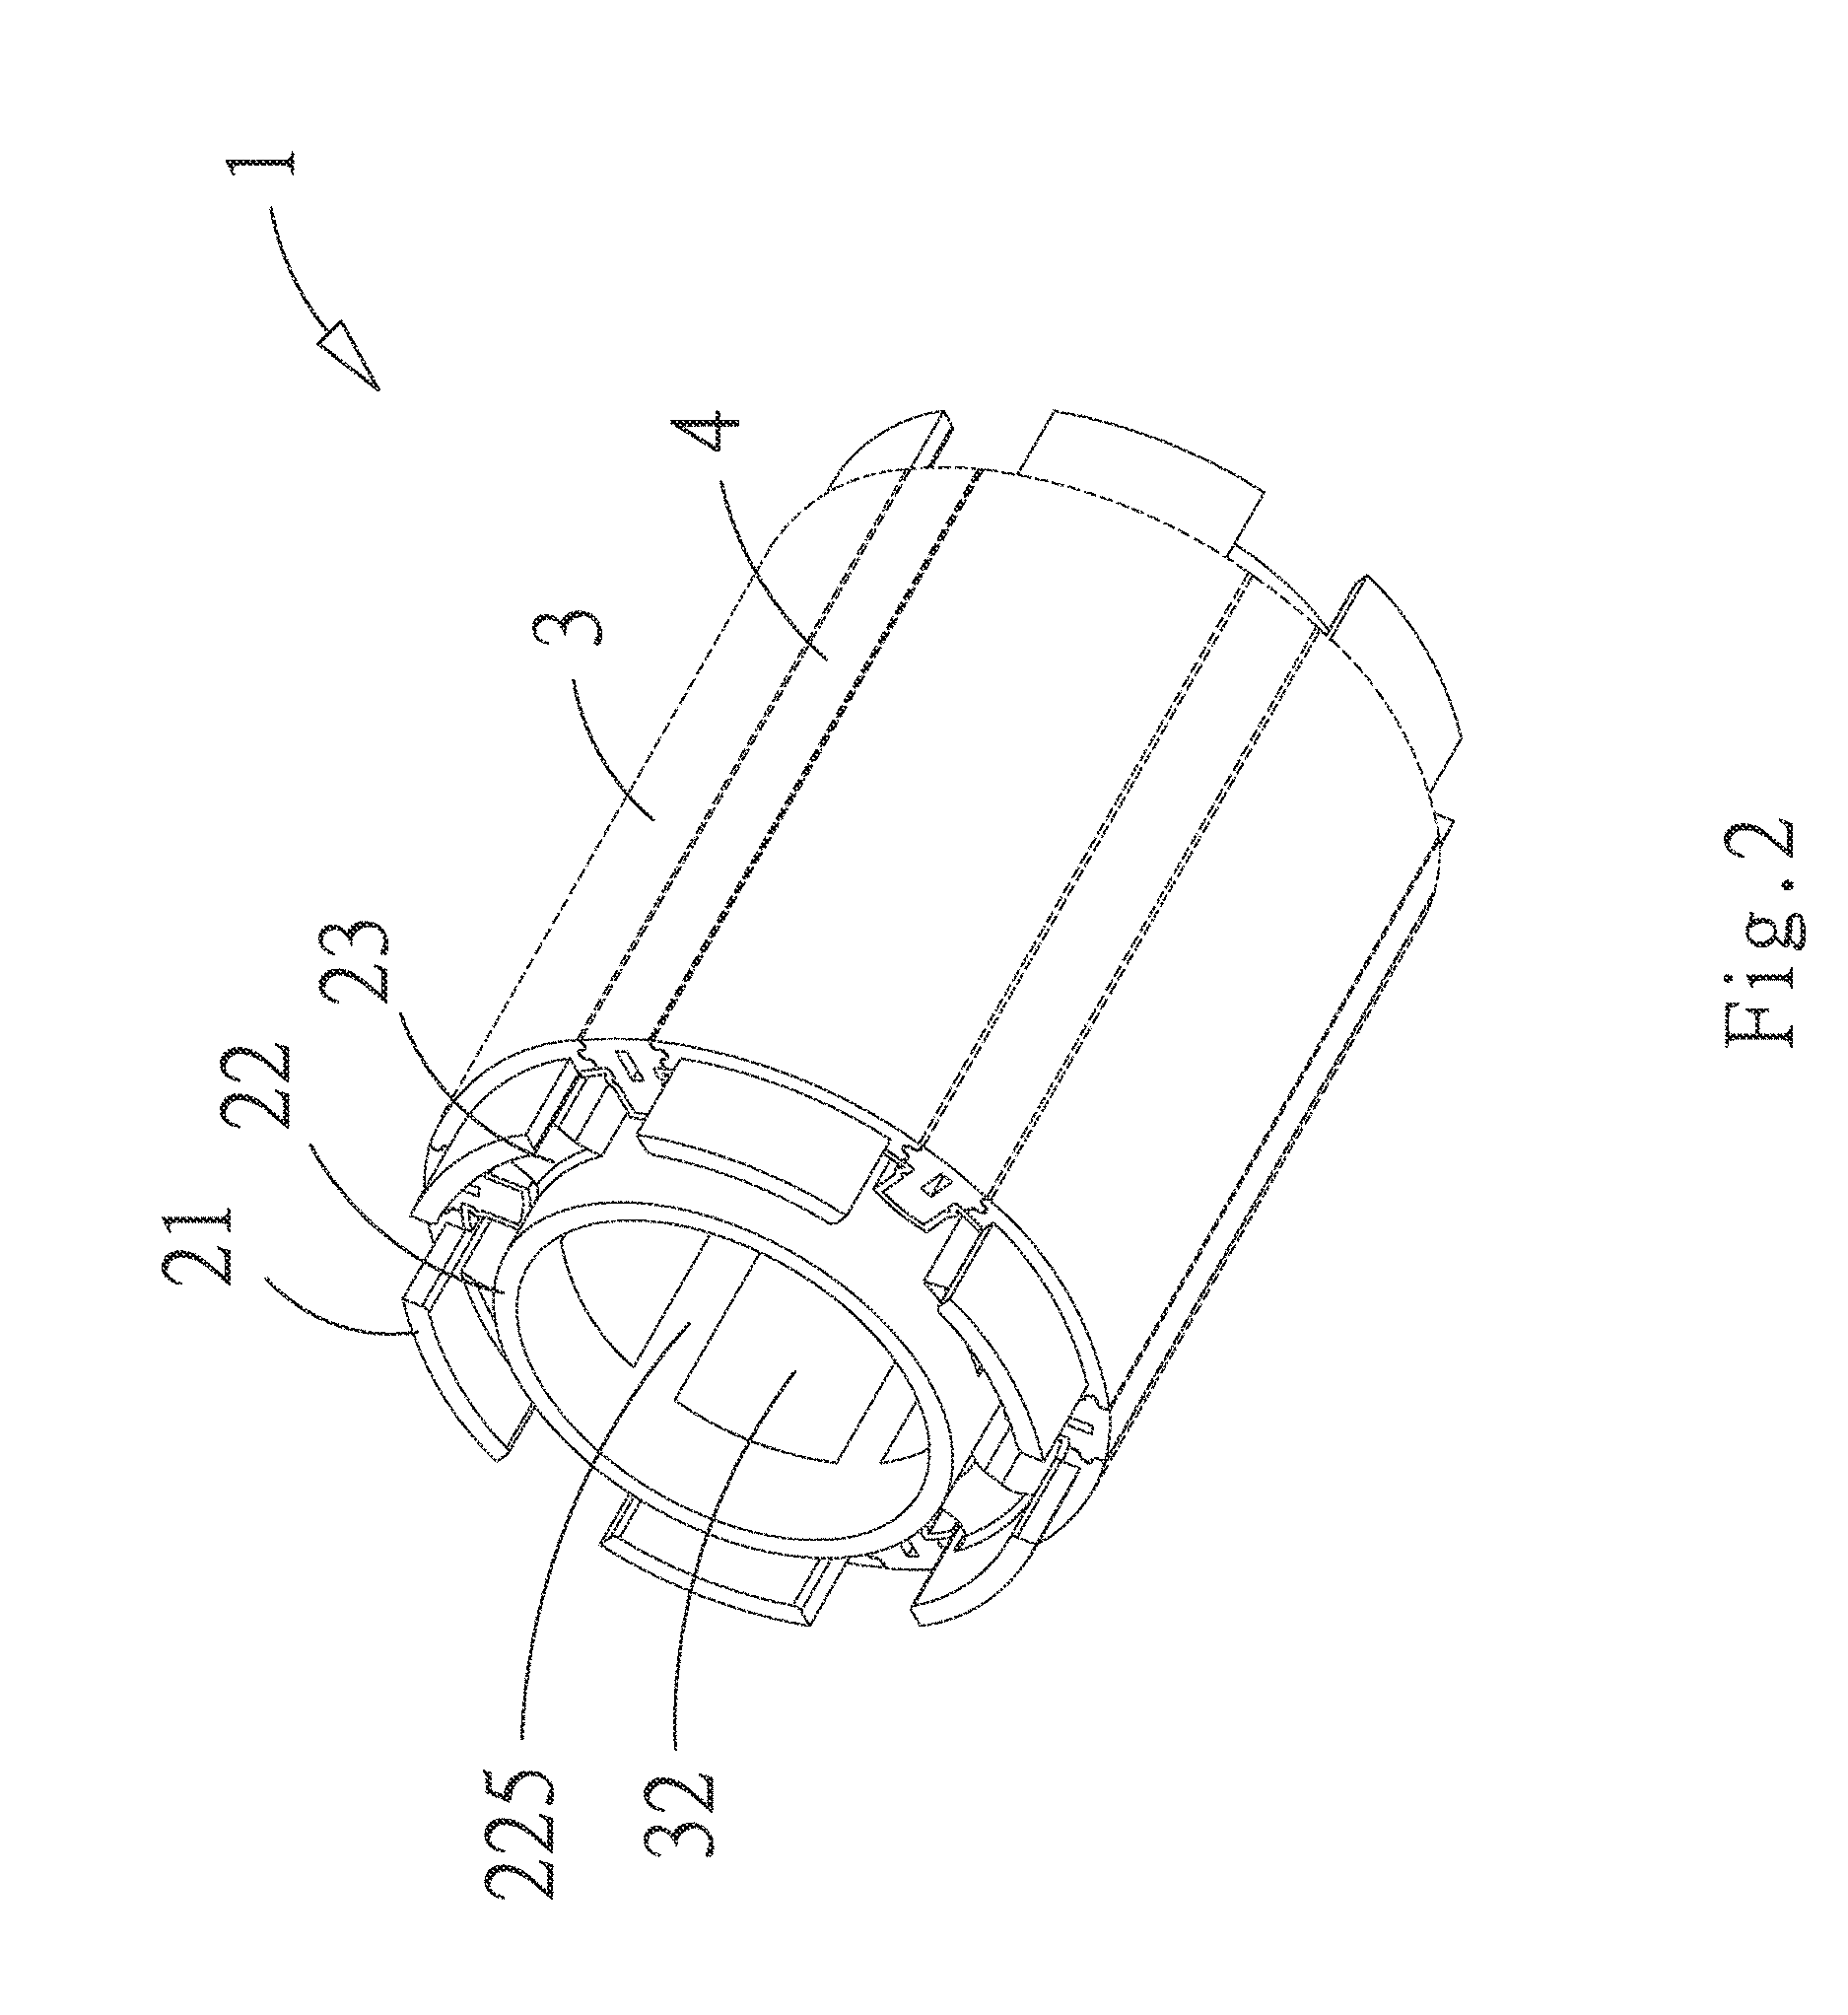 Motor stator device with simple coil-winding structure